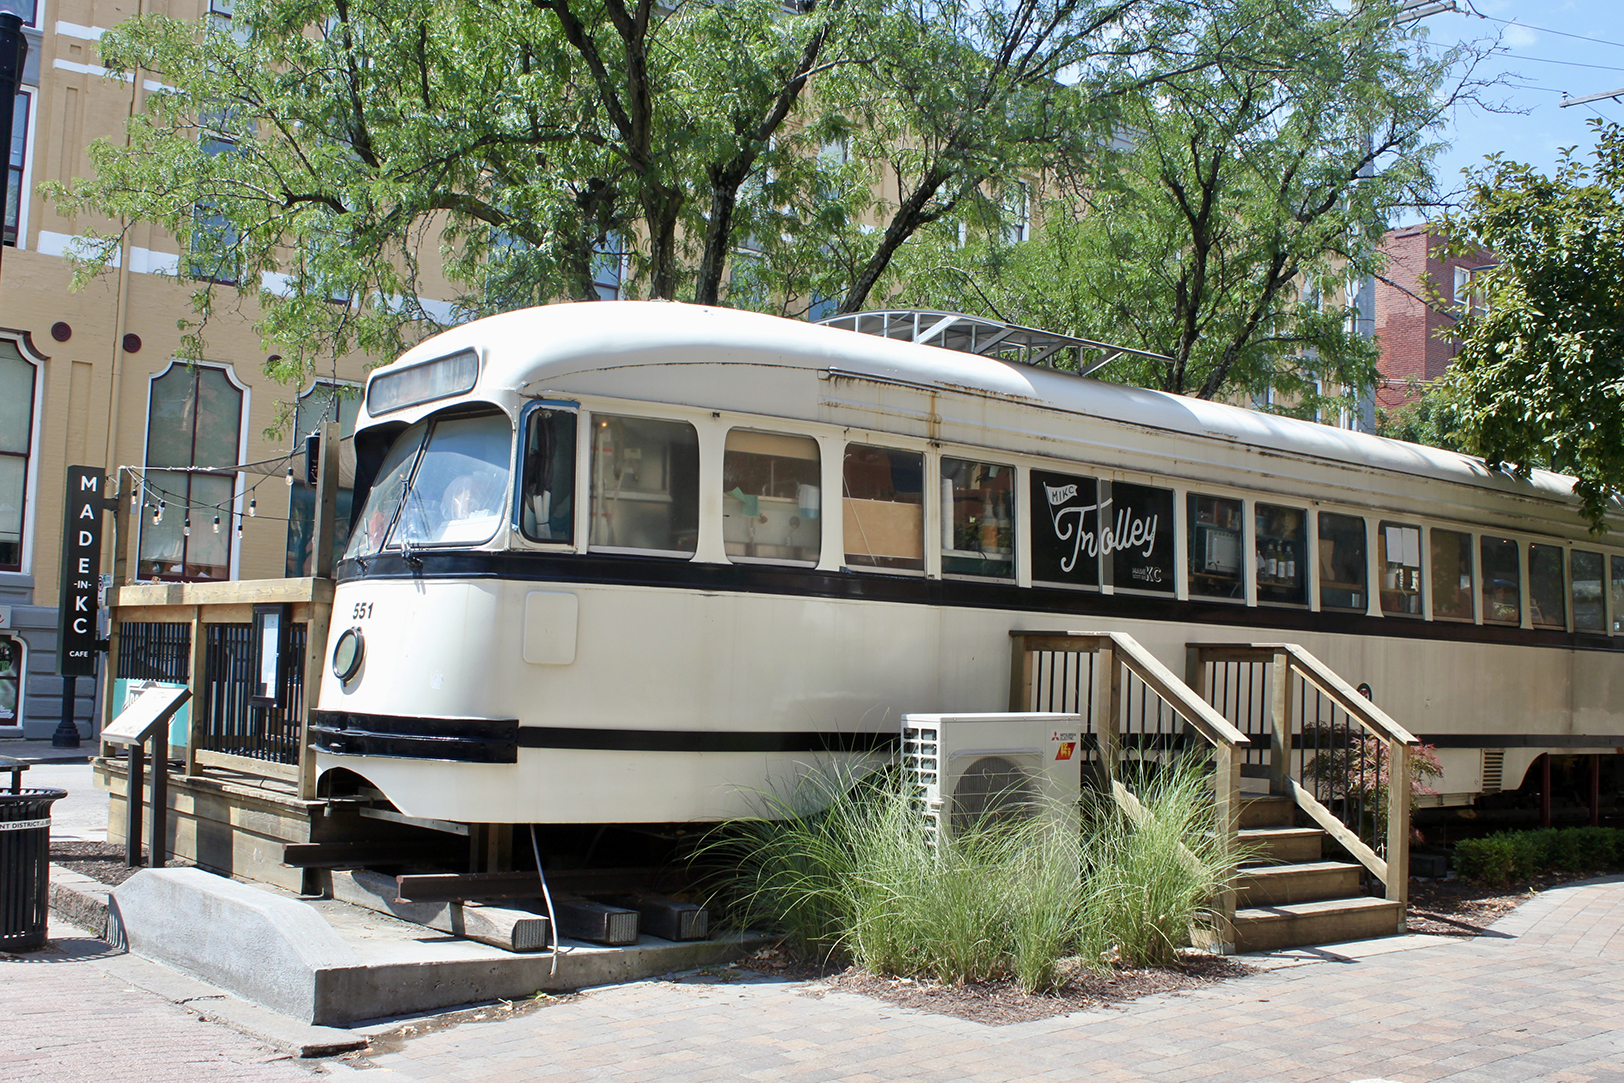 Made in KC’s trolley cafe gets a new driver: Iconic Kansas City brand set to reopen space in August